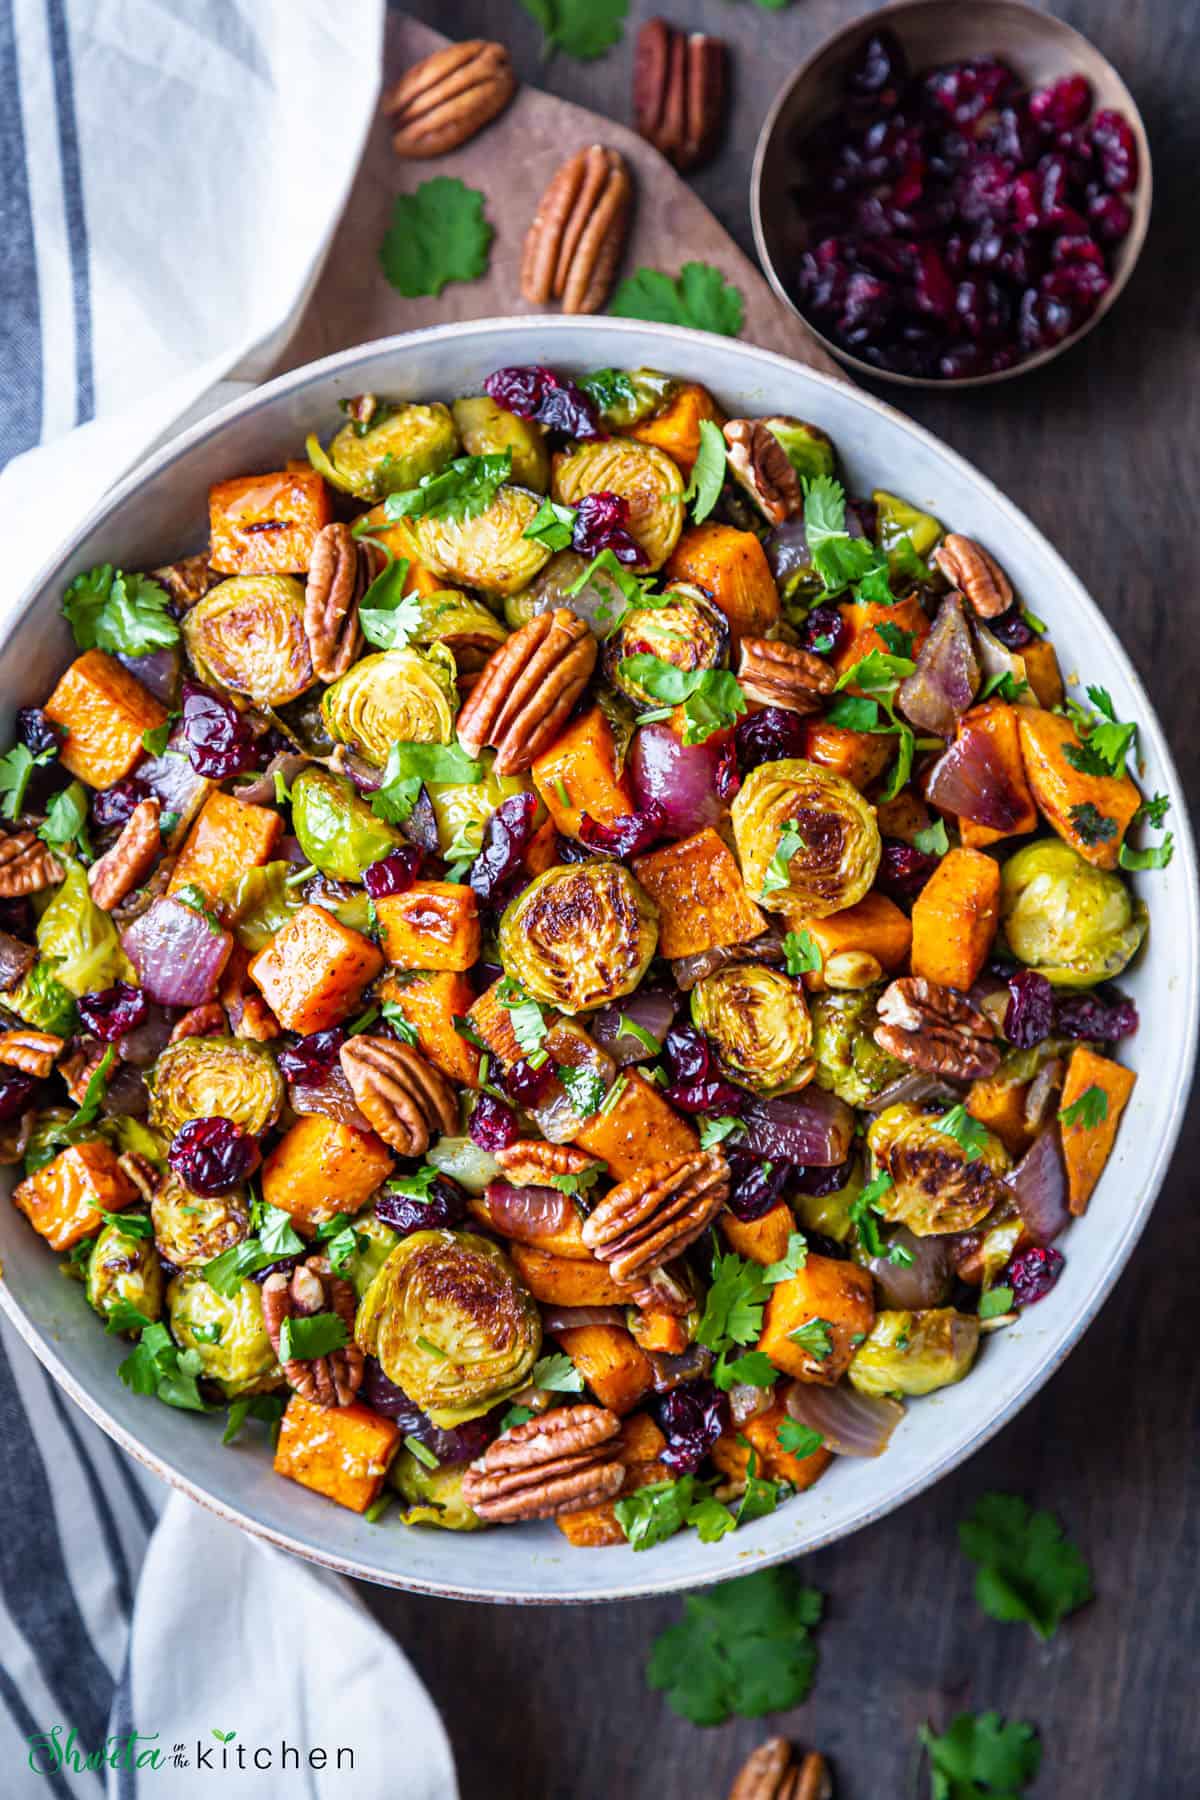 Bowl of roasted brussels sprouts and sweet potatoes with bowl of dry cranberries at side